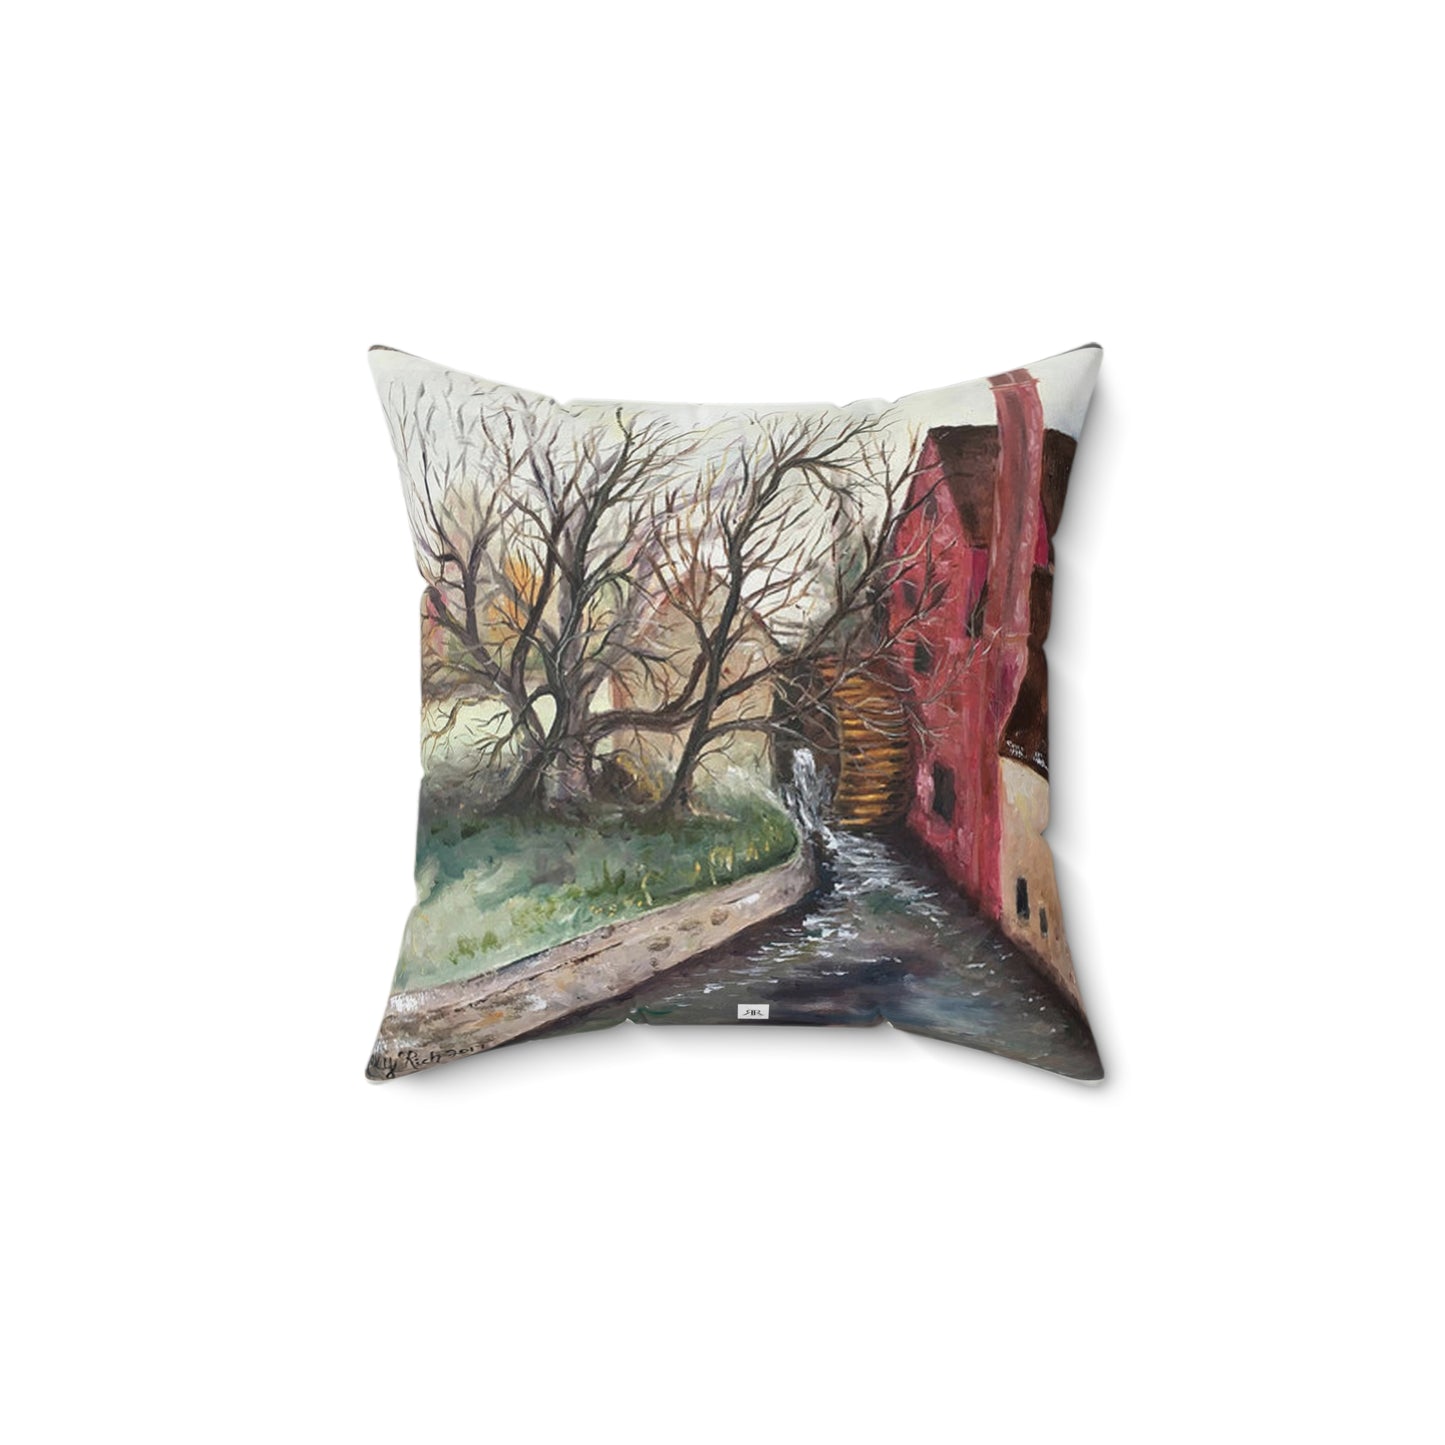 Waterwheel The Old Mill Cotswolds Indoor Spun Polyester Square Pillow